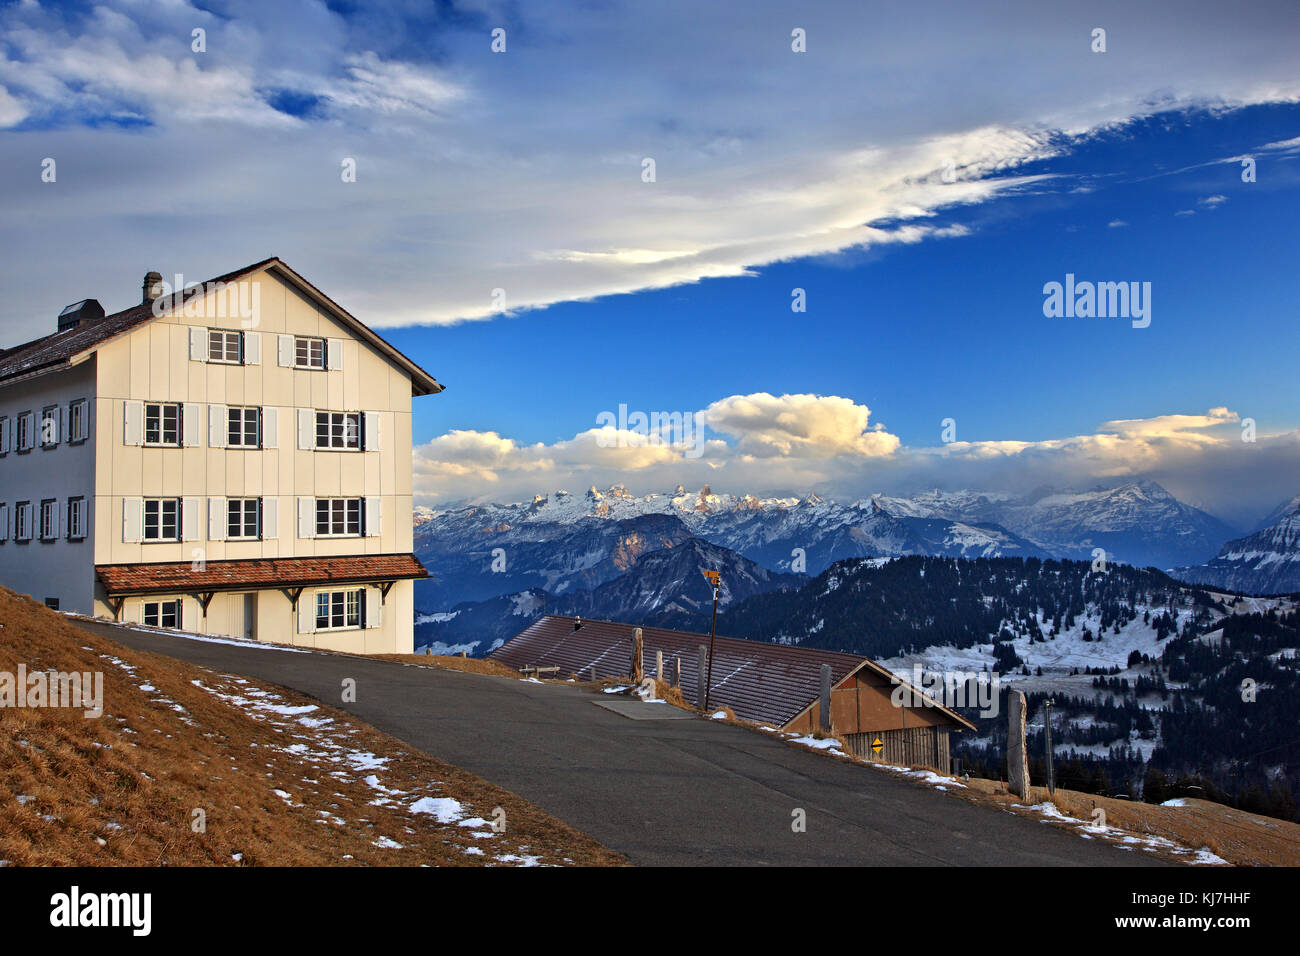 View to the Swiss Alps from the top of Mount Rigi, Switzerland Stock Photo